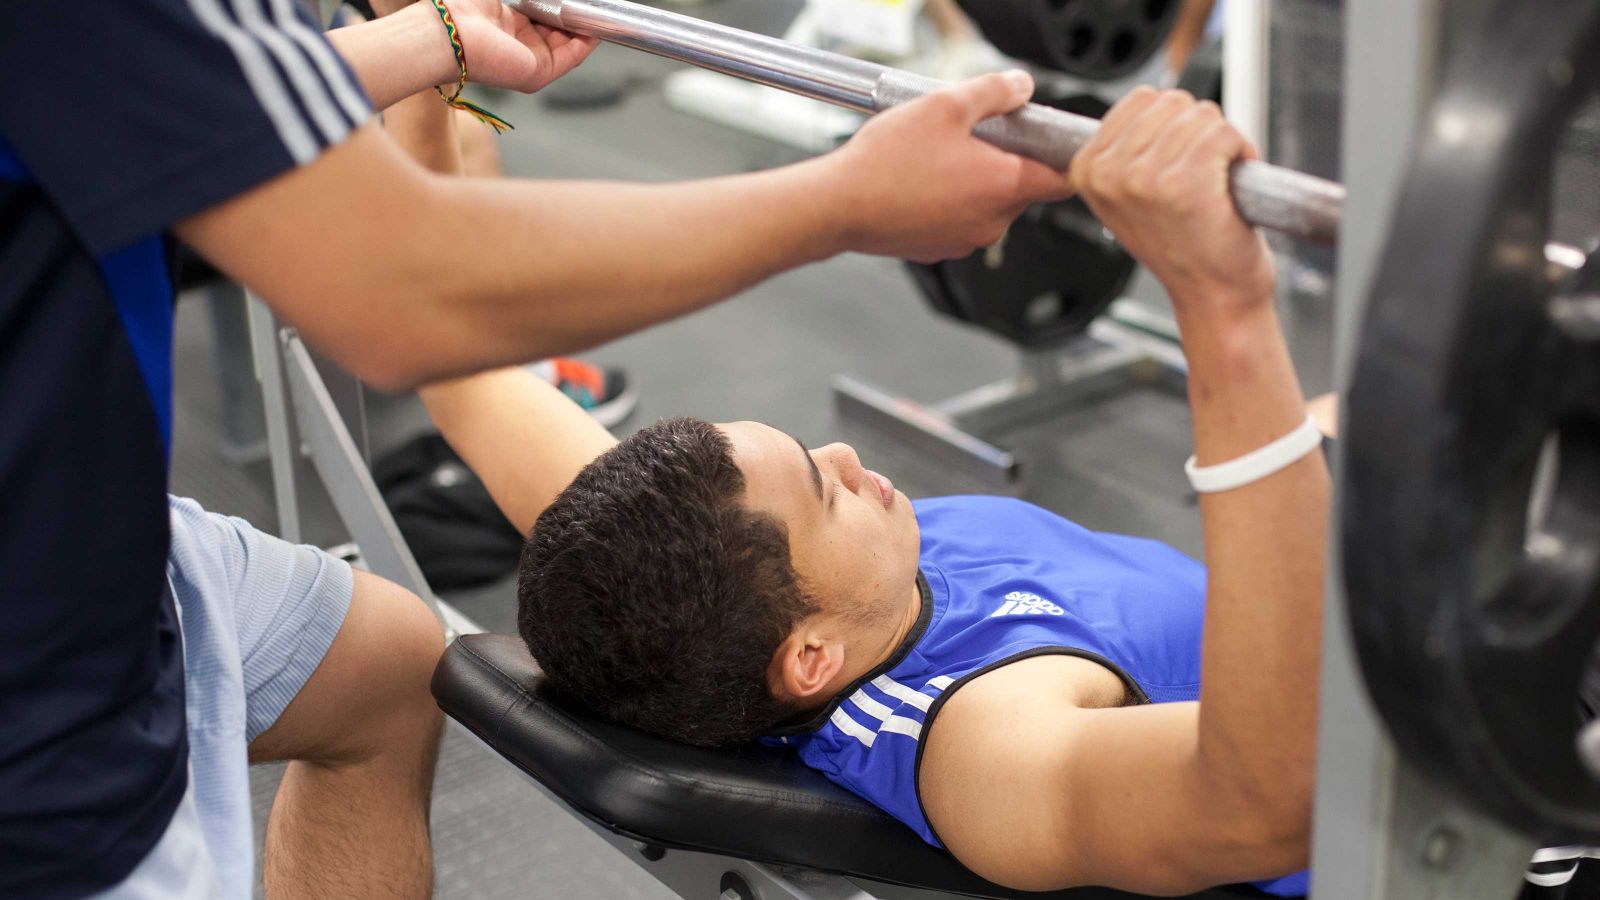 Hauora – a man lifts weights with a spotter on a bench press.